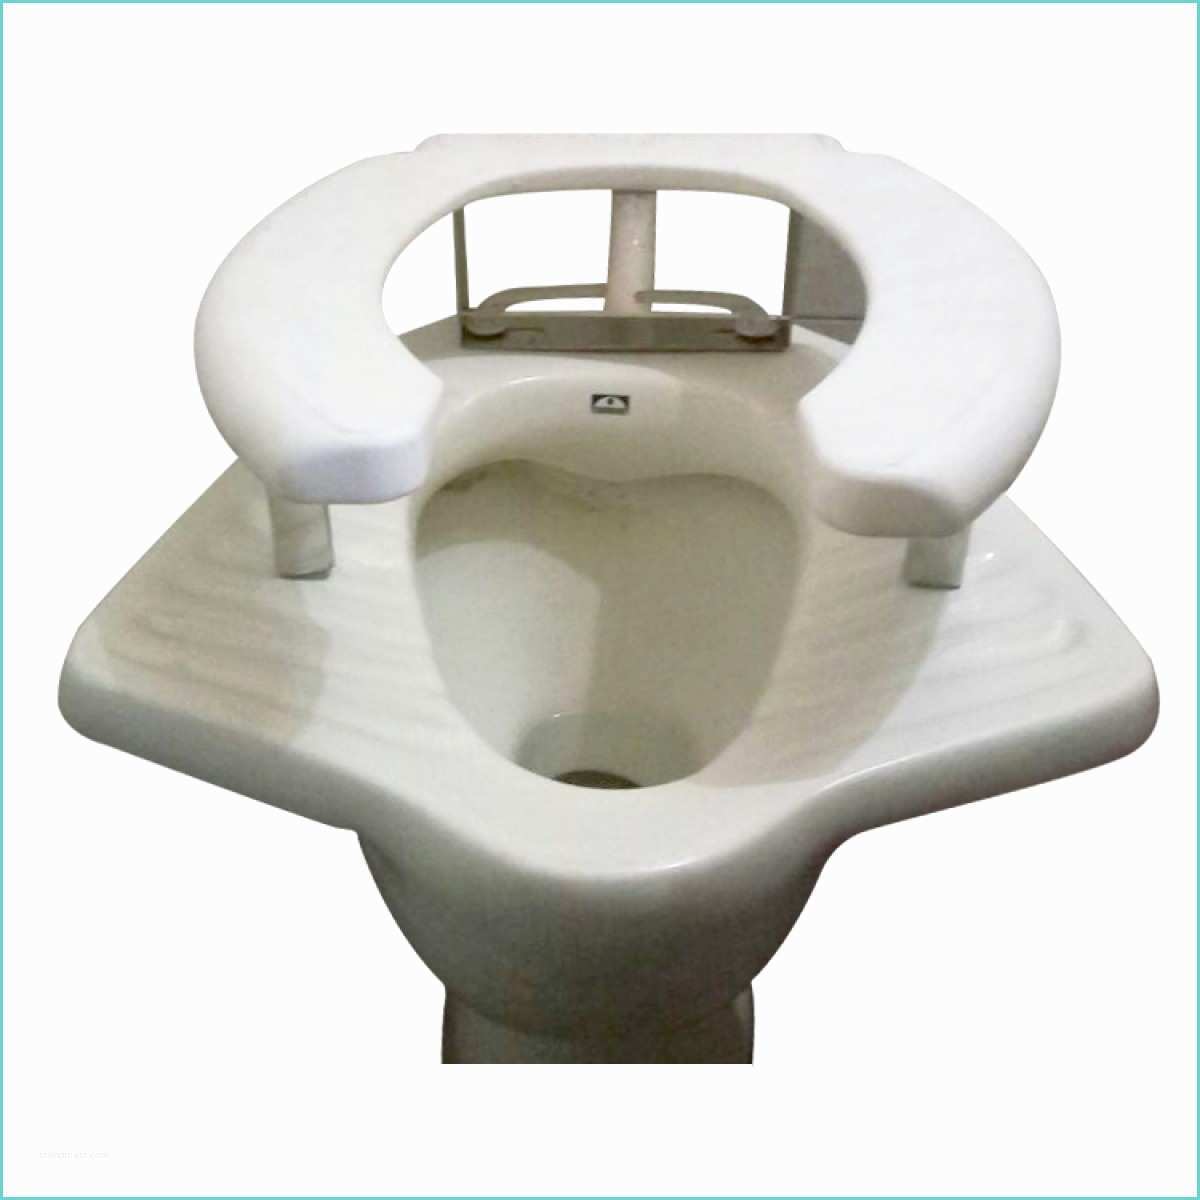 Convert Western toilet to Indian Pedder Johnson Raised toilet Seat Anglo Indian Mode